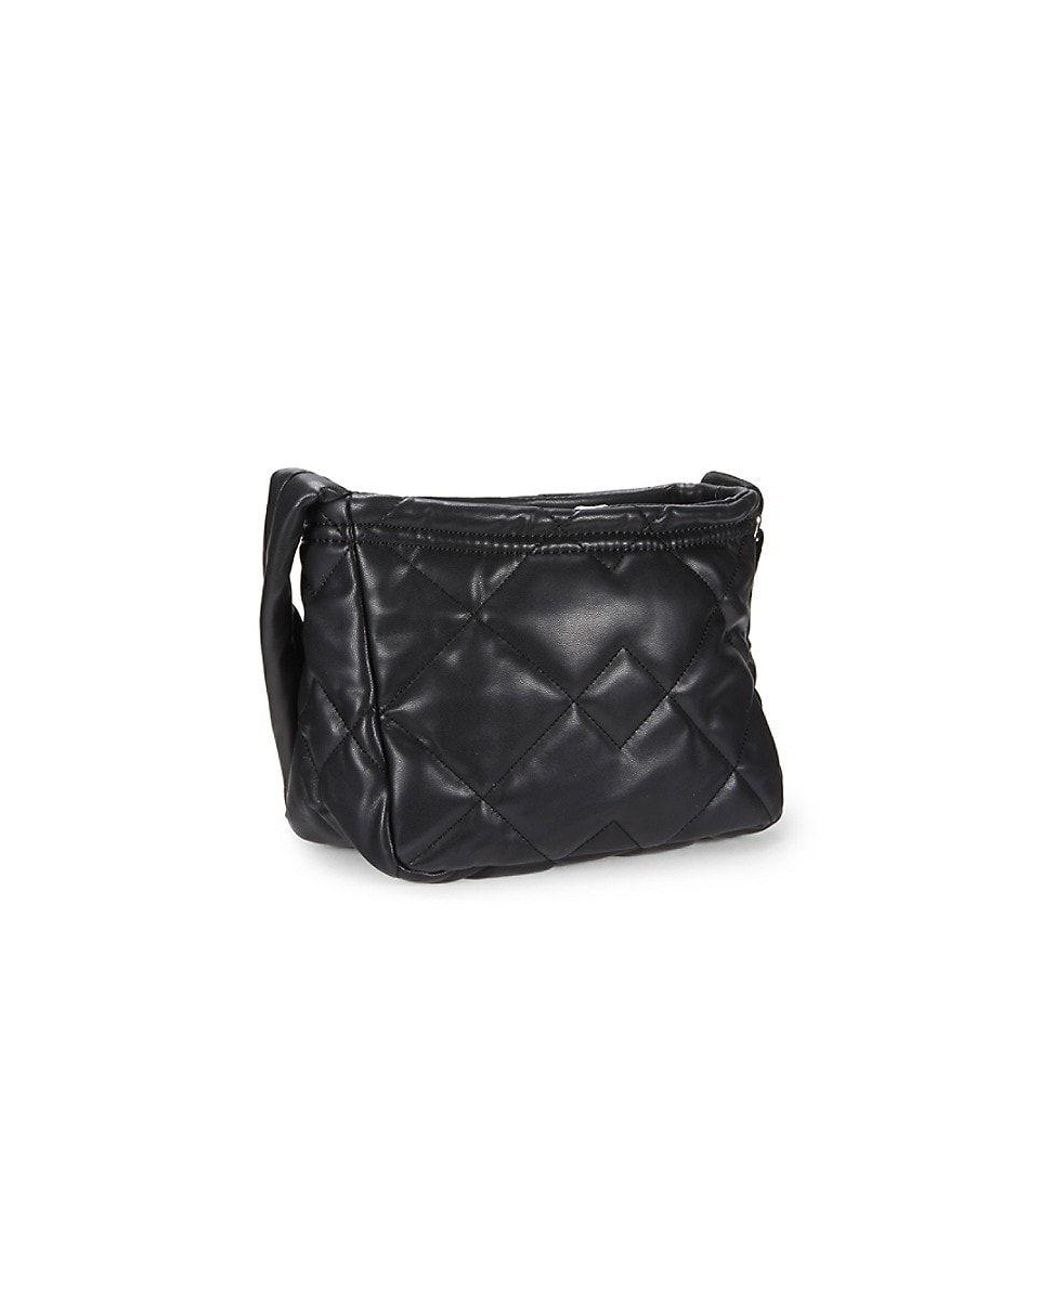 Markese Black Quilted Leather Crossbody Bag, Best Price and Reviews